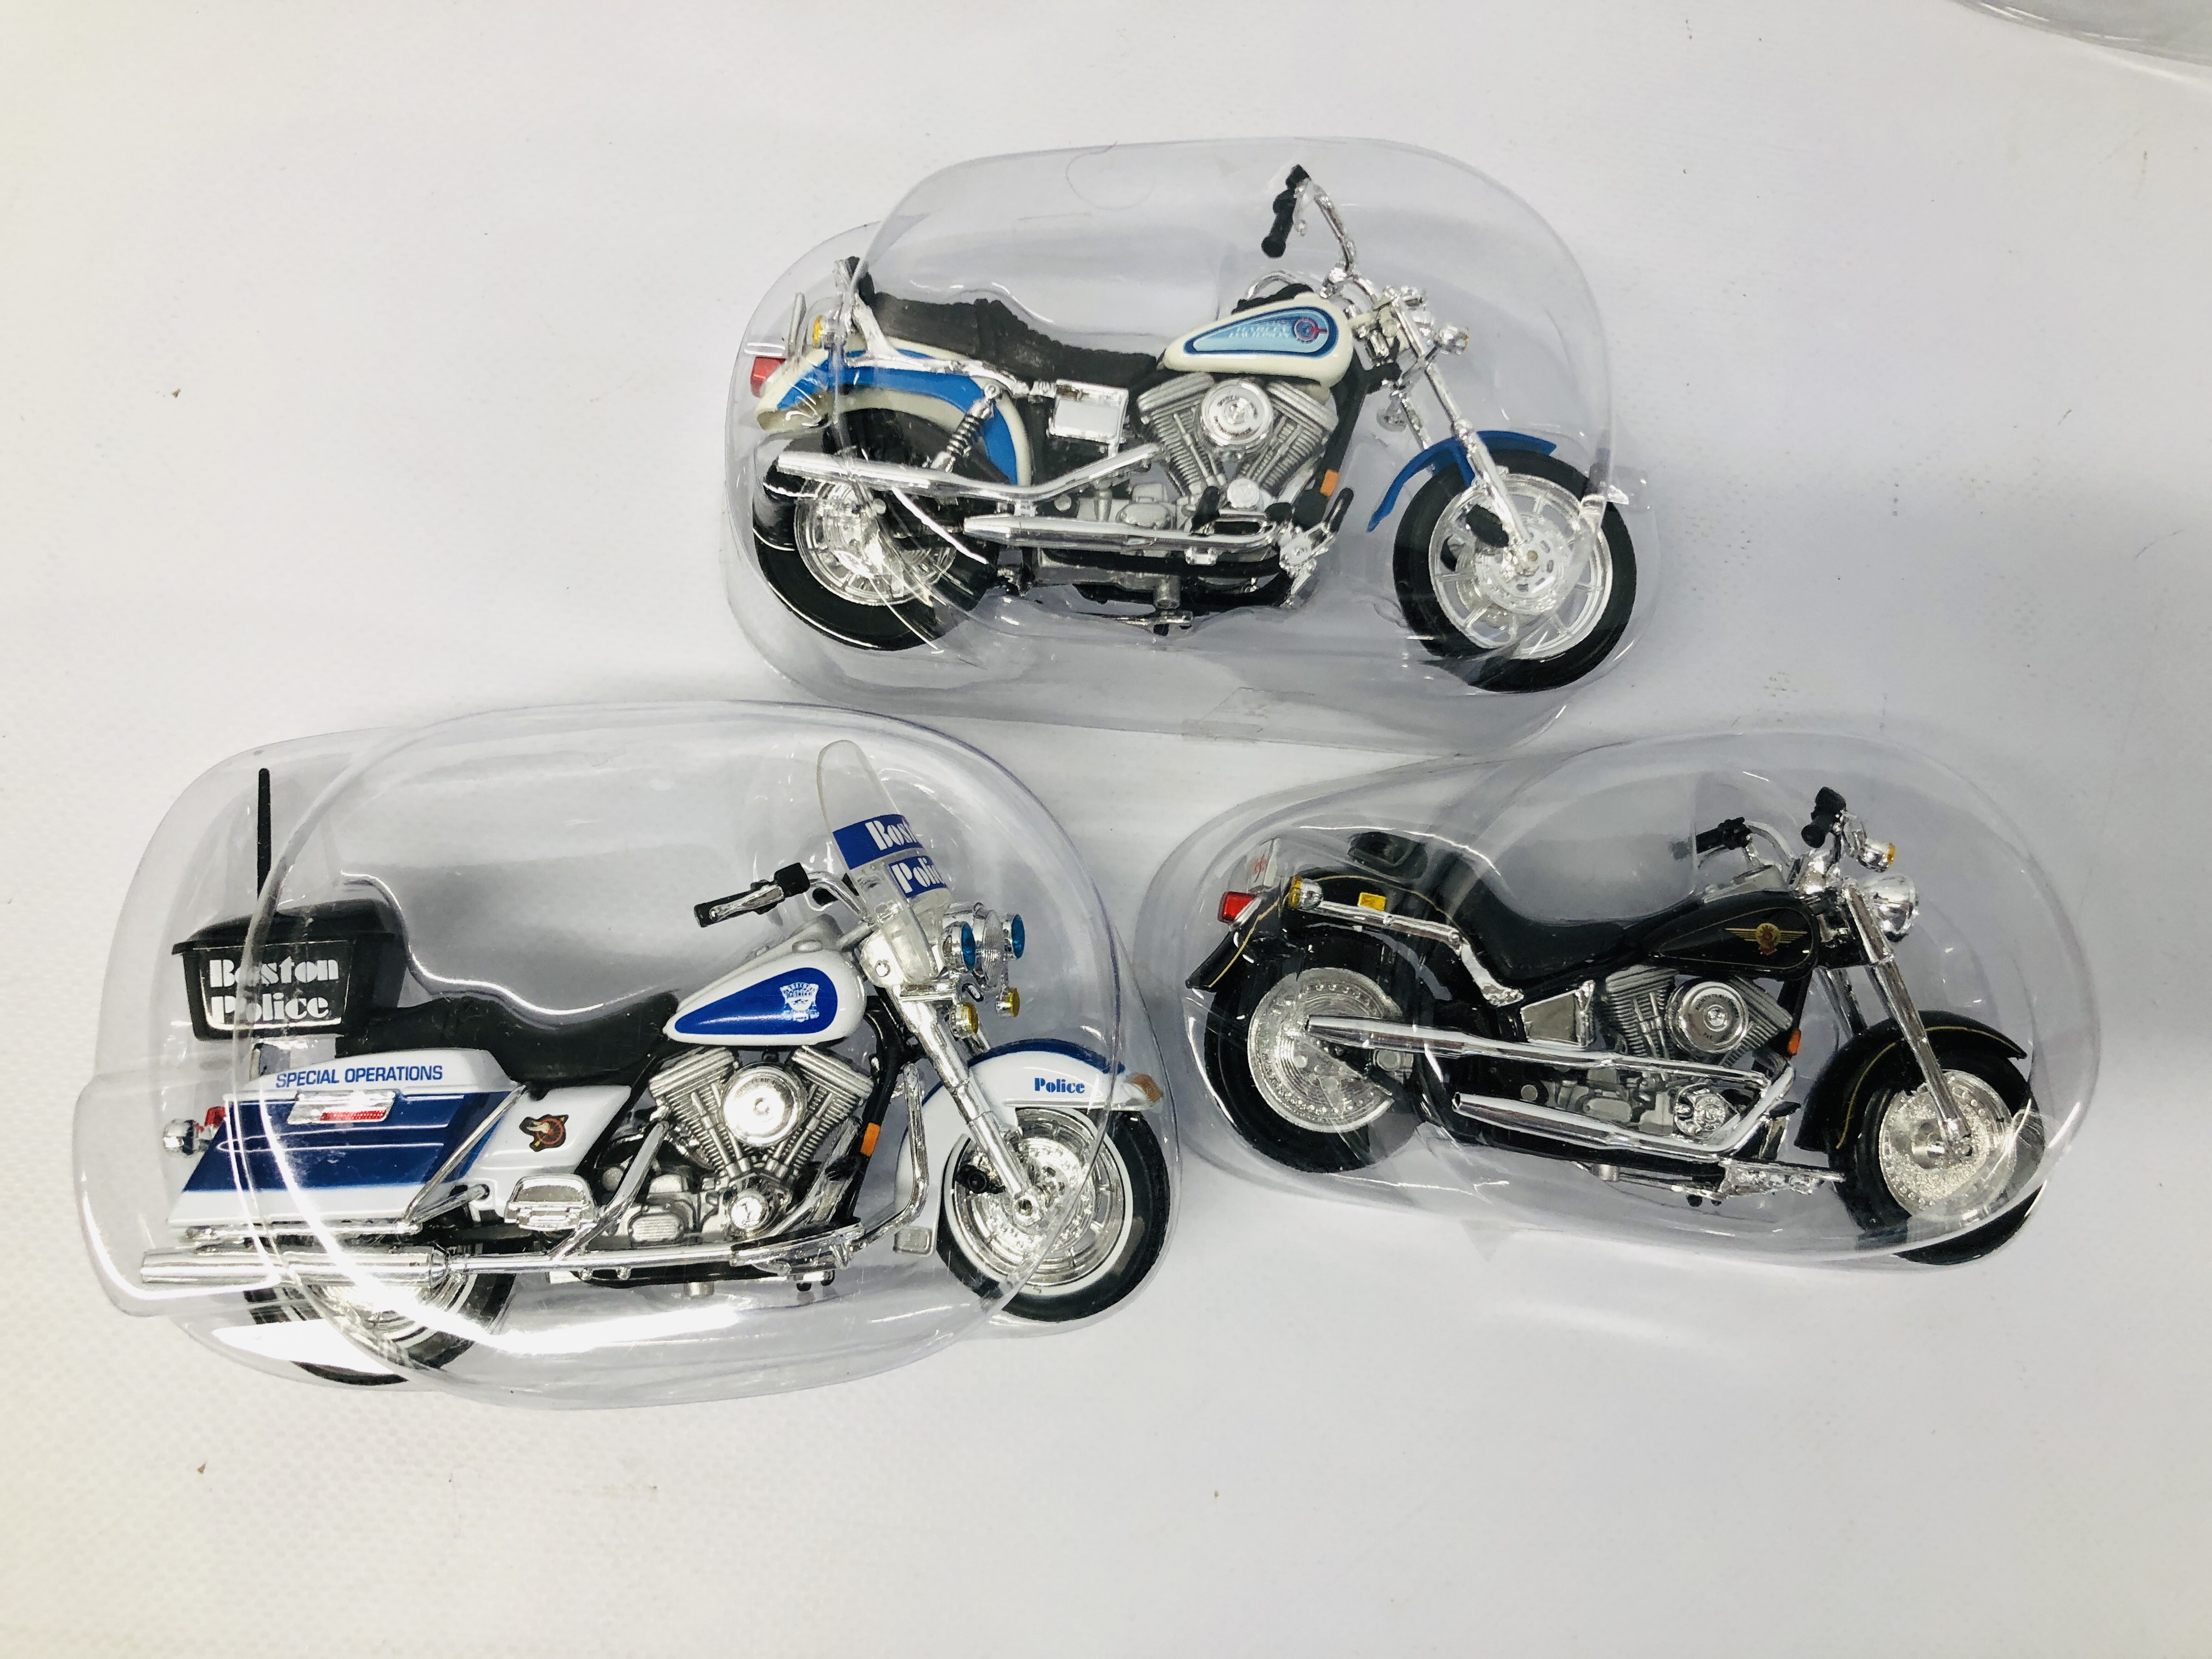 A COMPLETE SET OF 24 HARLEY DAVIDSON MODEL MOTORCYCLES "THE LEGENDS COLLECTION" - Image 8 of 9